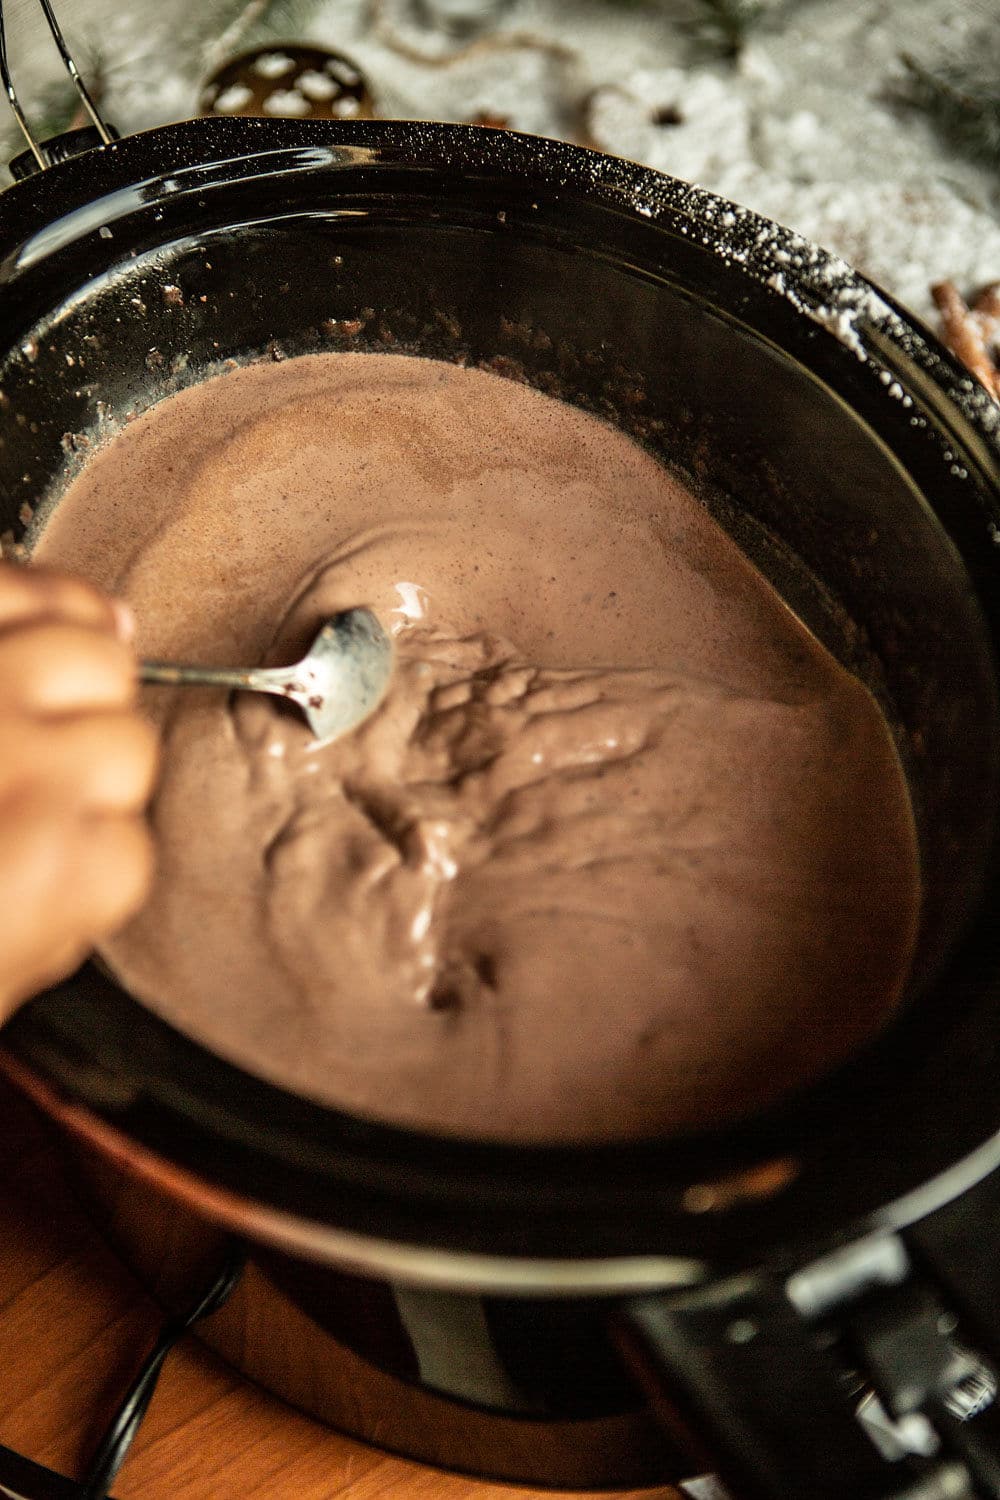 hot chocolate in the slow cooker with a spoon.